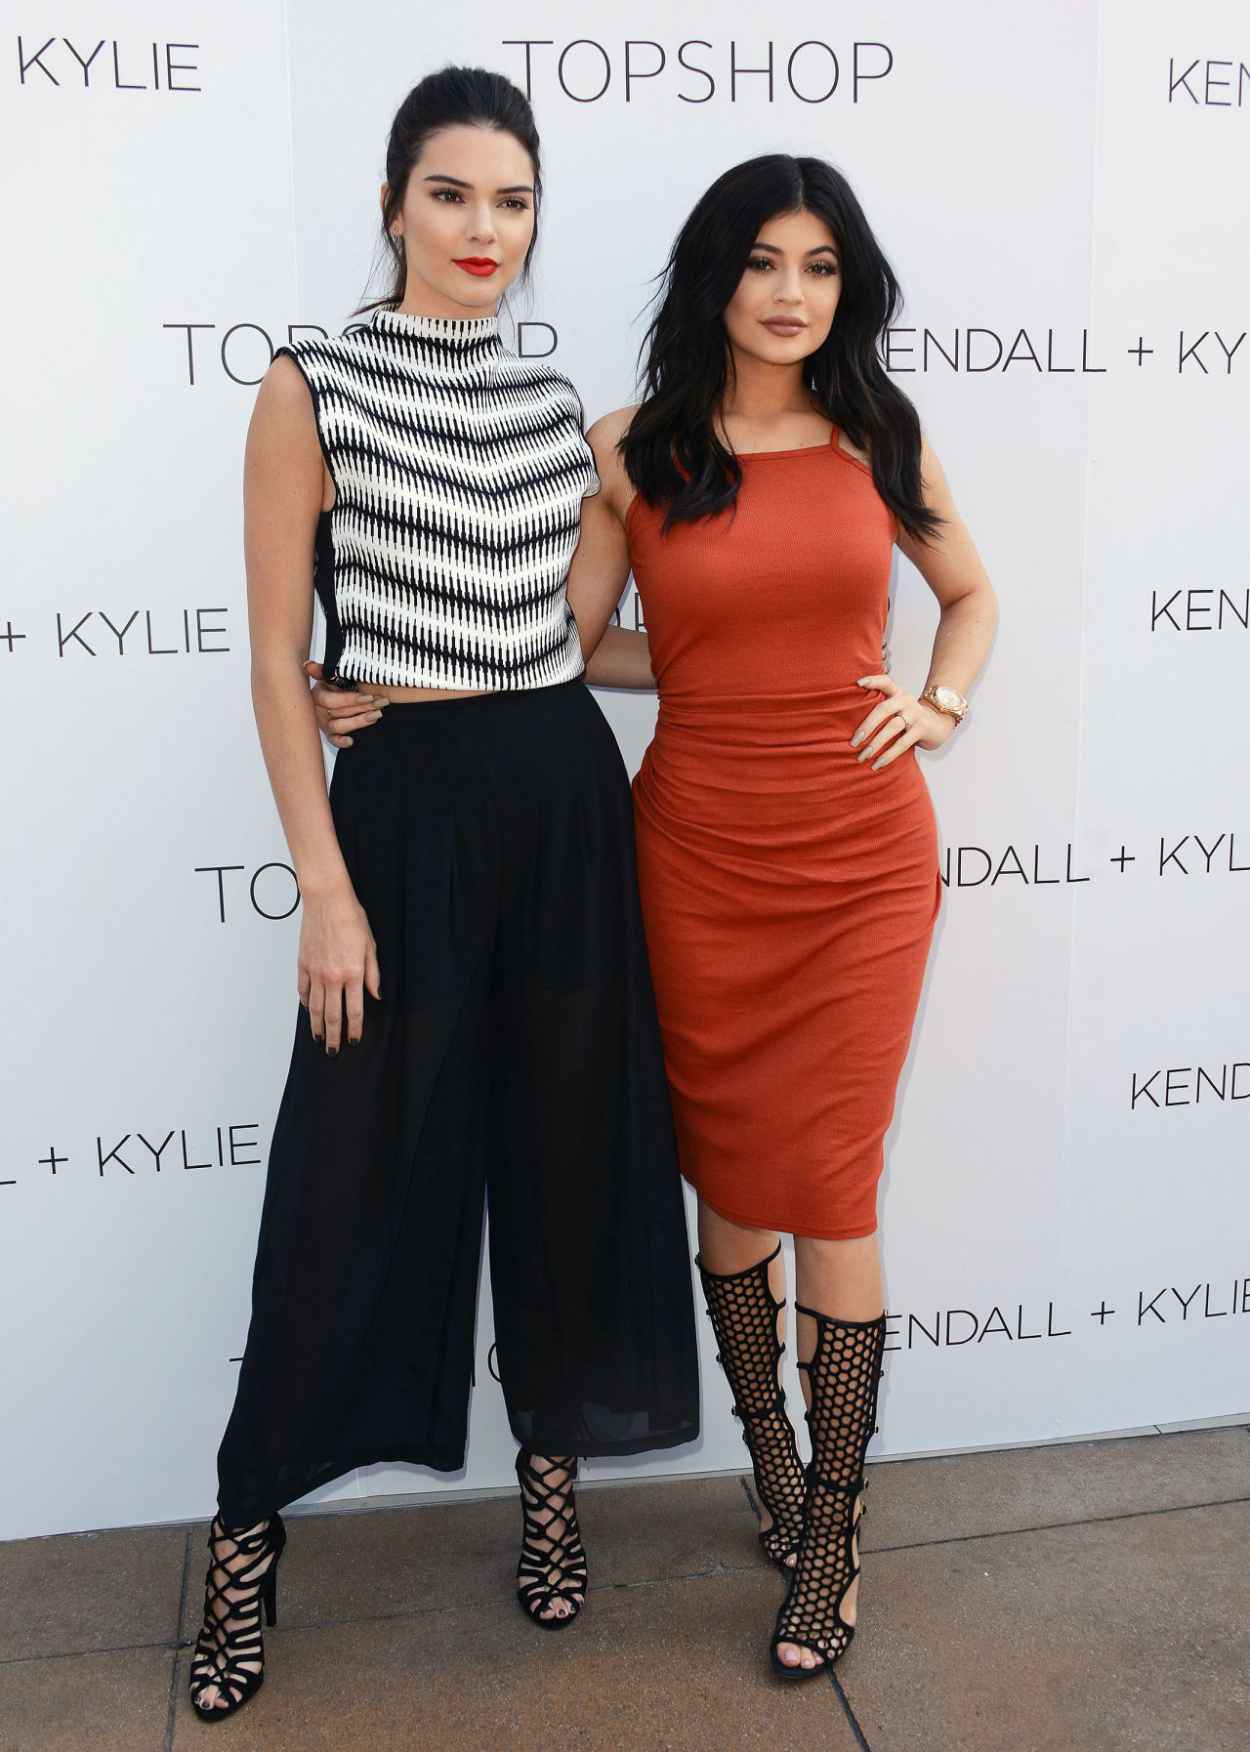 kylie and kendall jenner runway